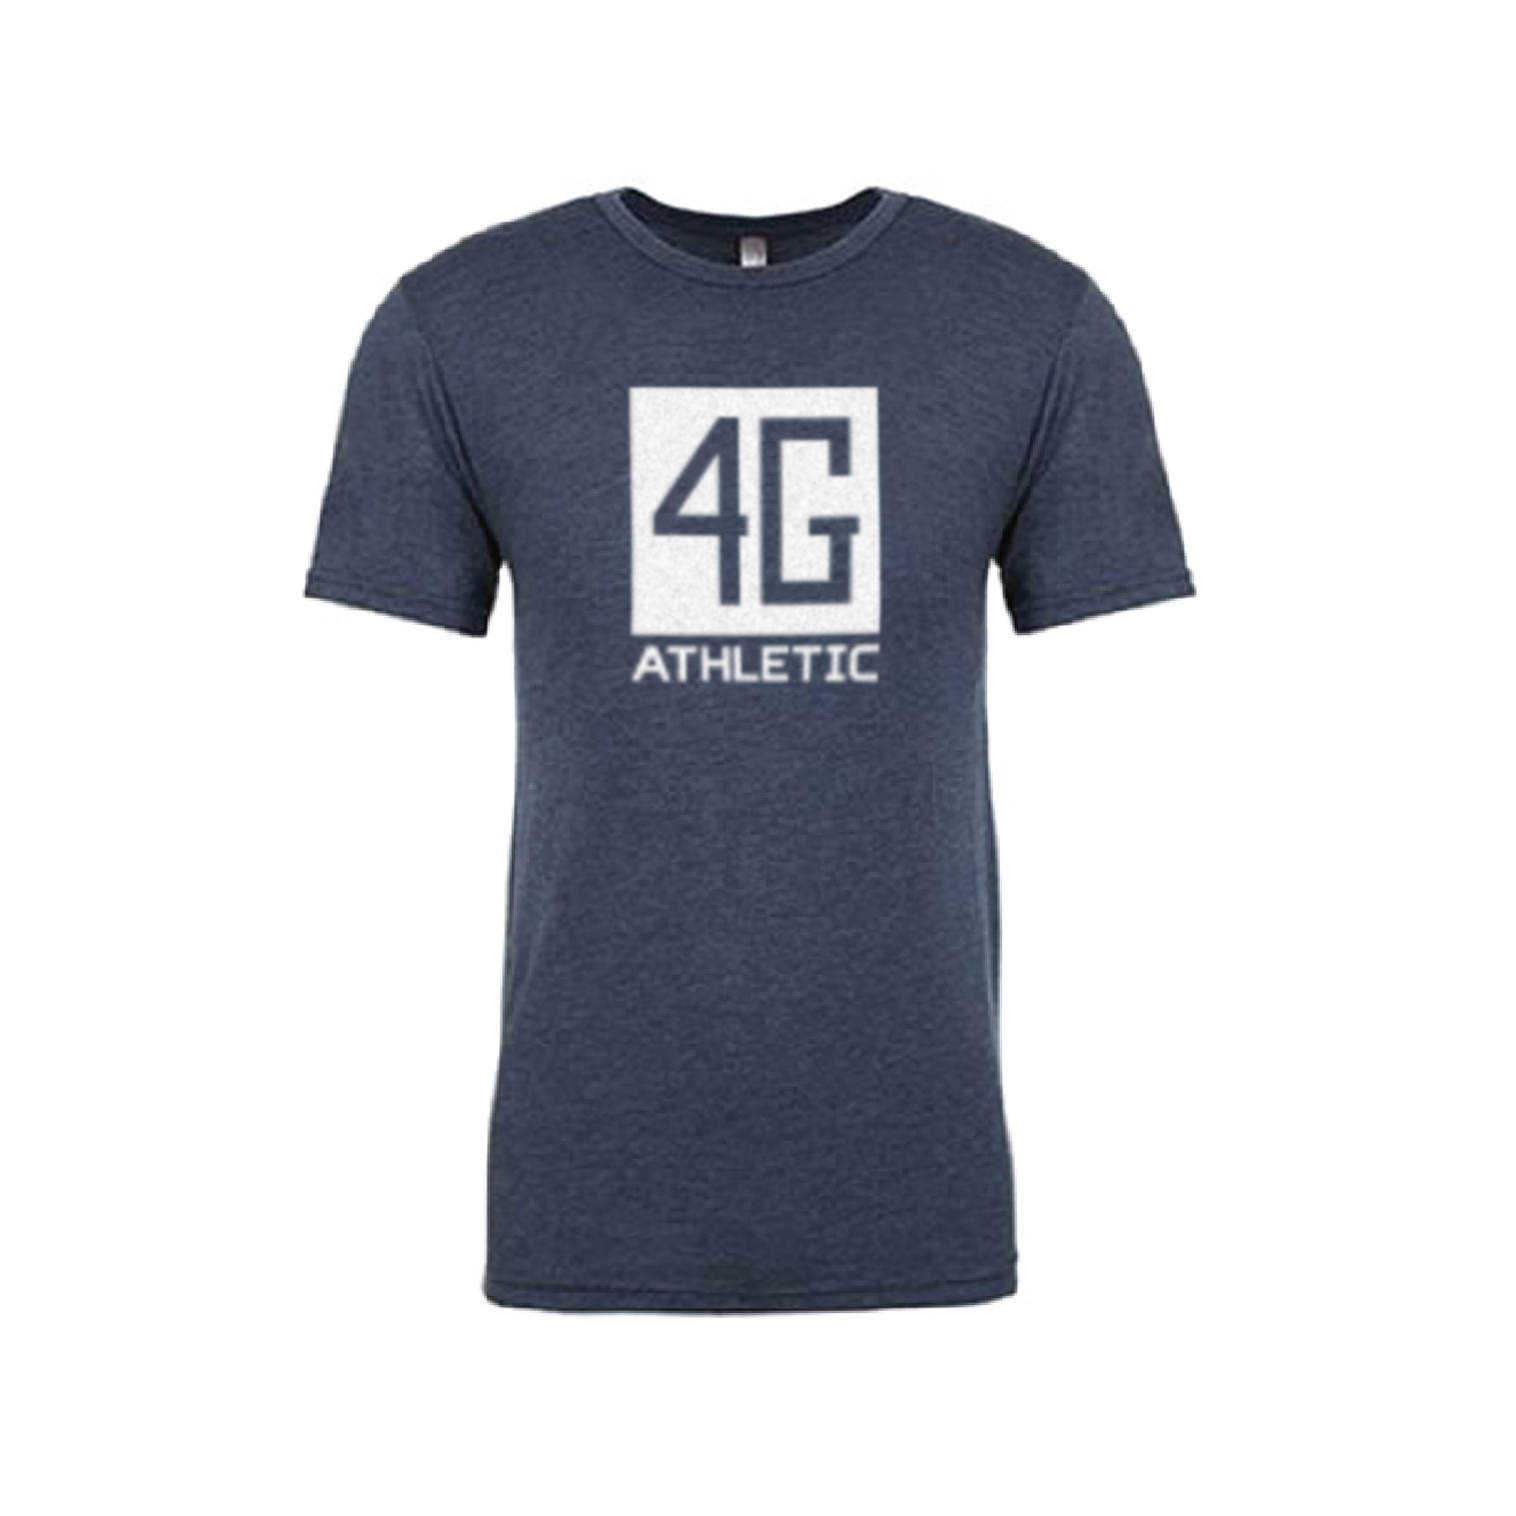 Athletic Tshirt 4G Blue Men\'s sale from for